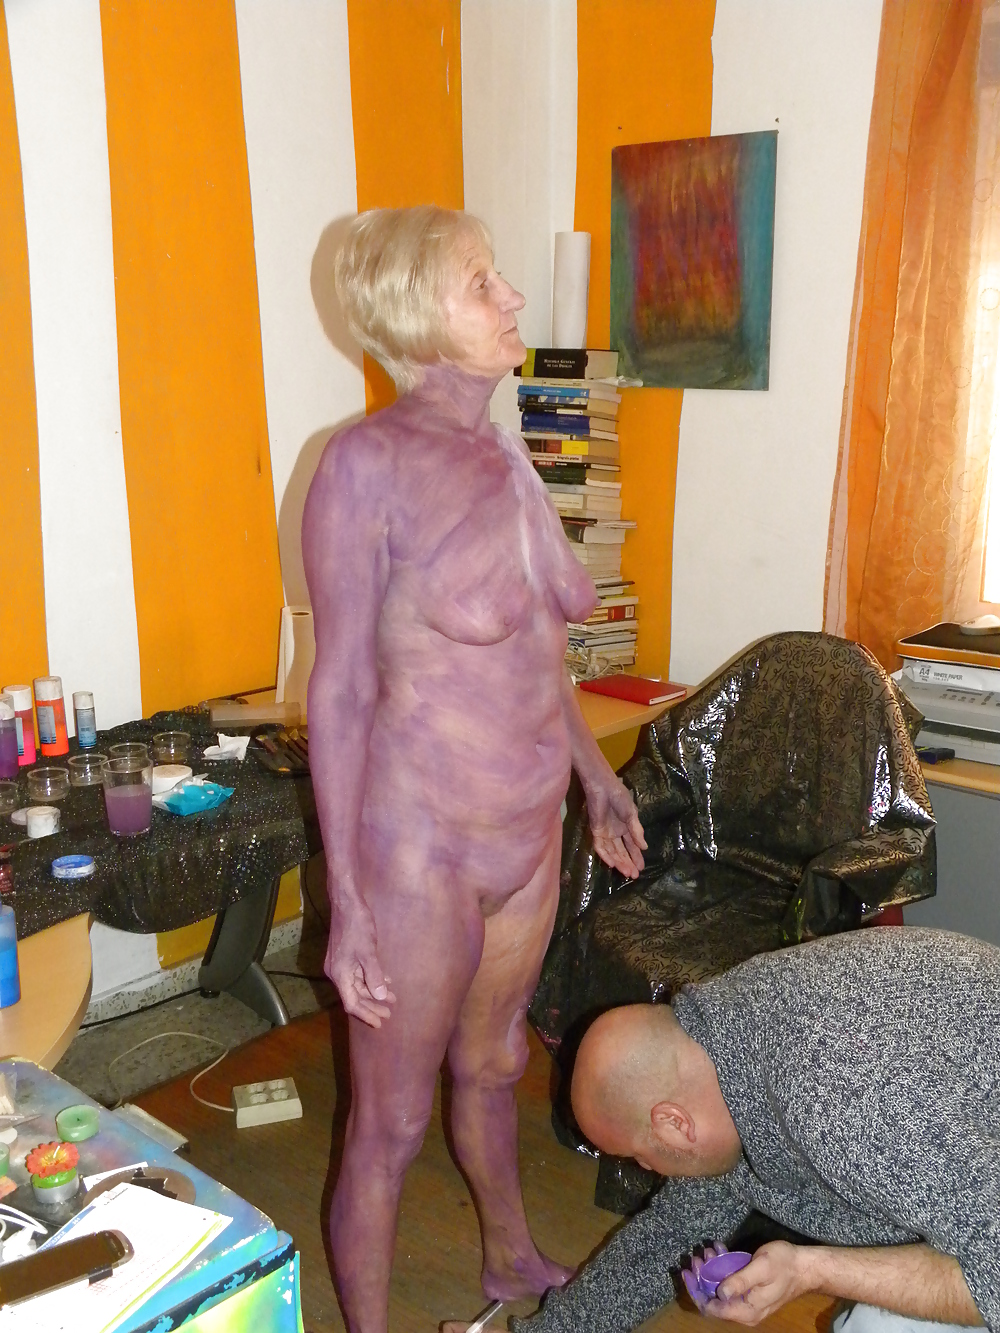 Body painting session #13376697